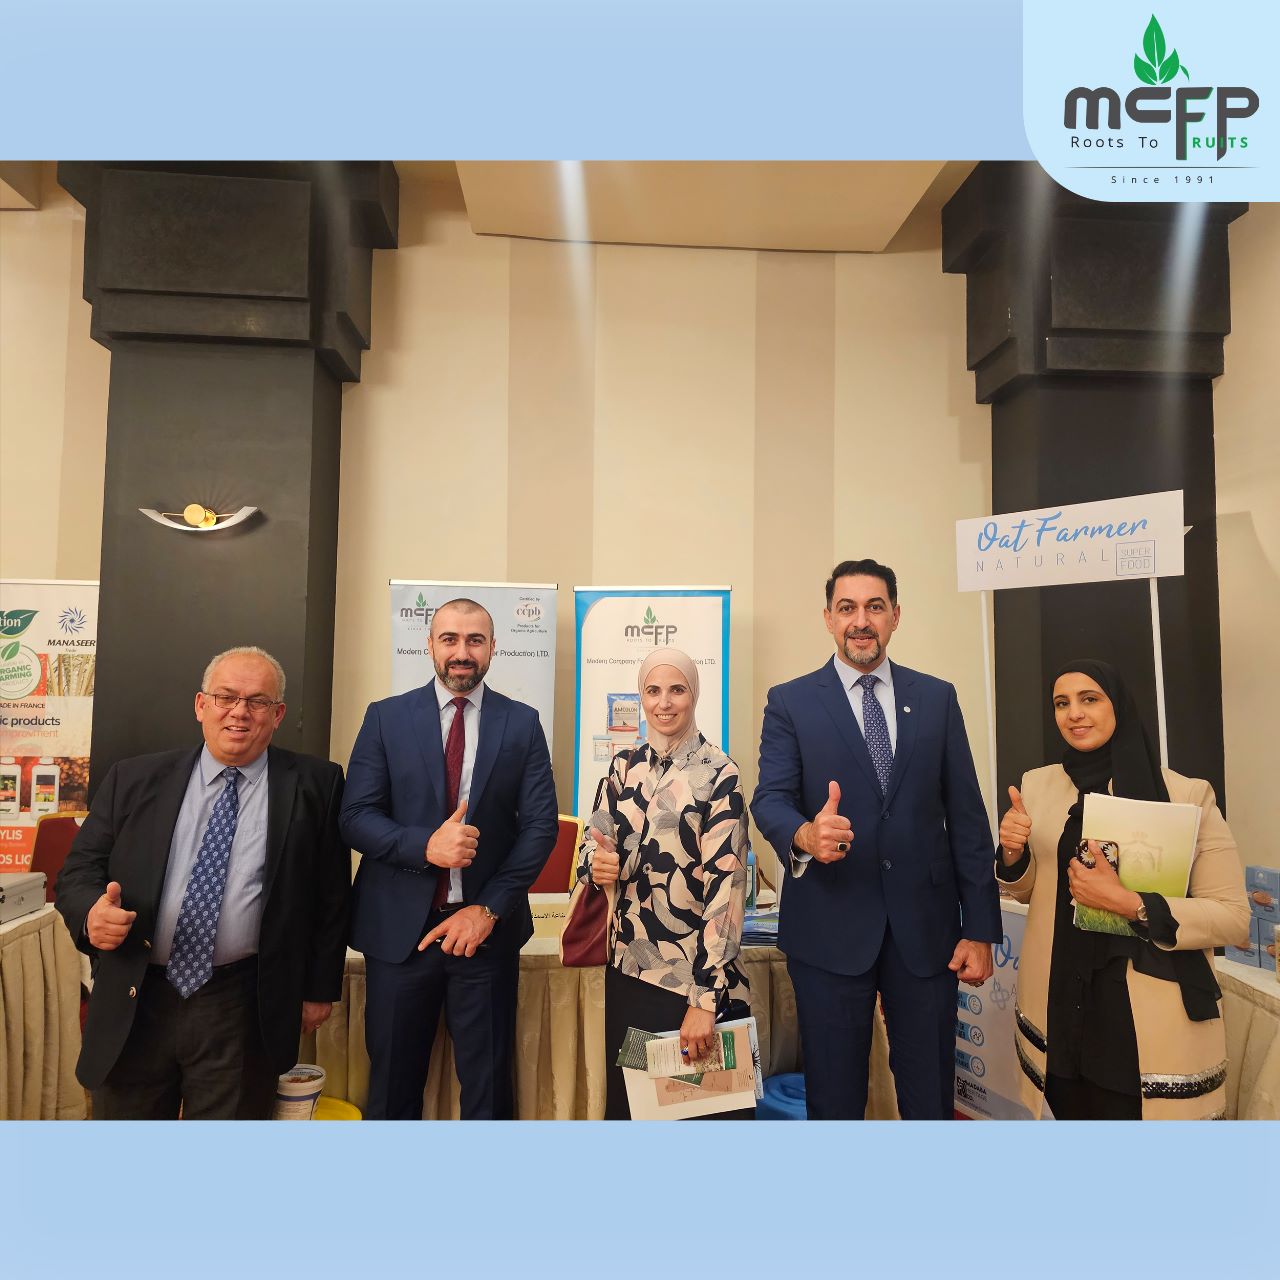 MCFP takes part of the Organic Agriculture Exhibition